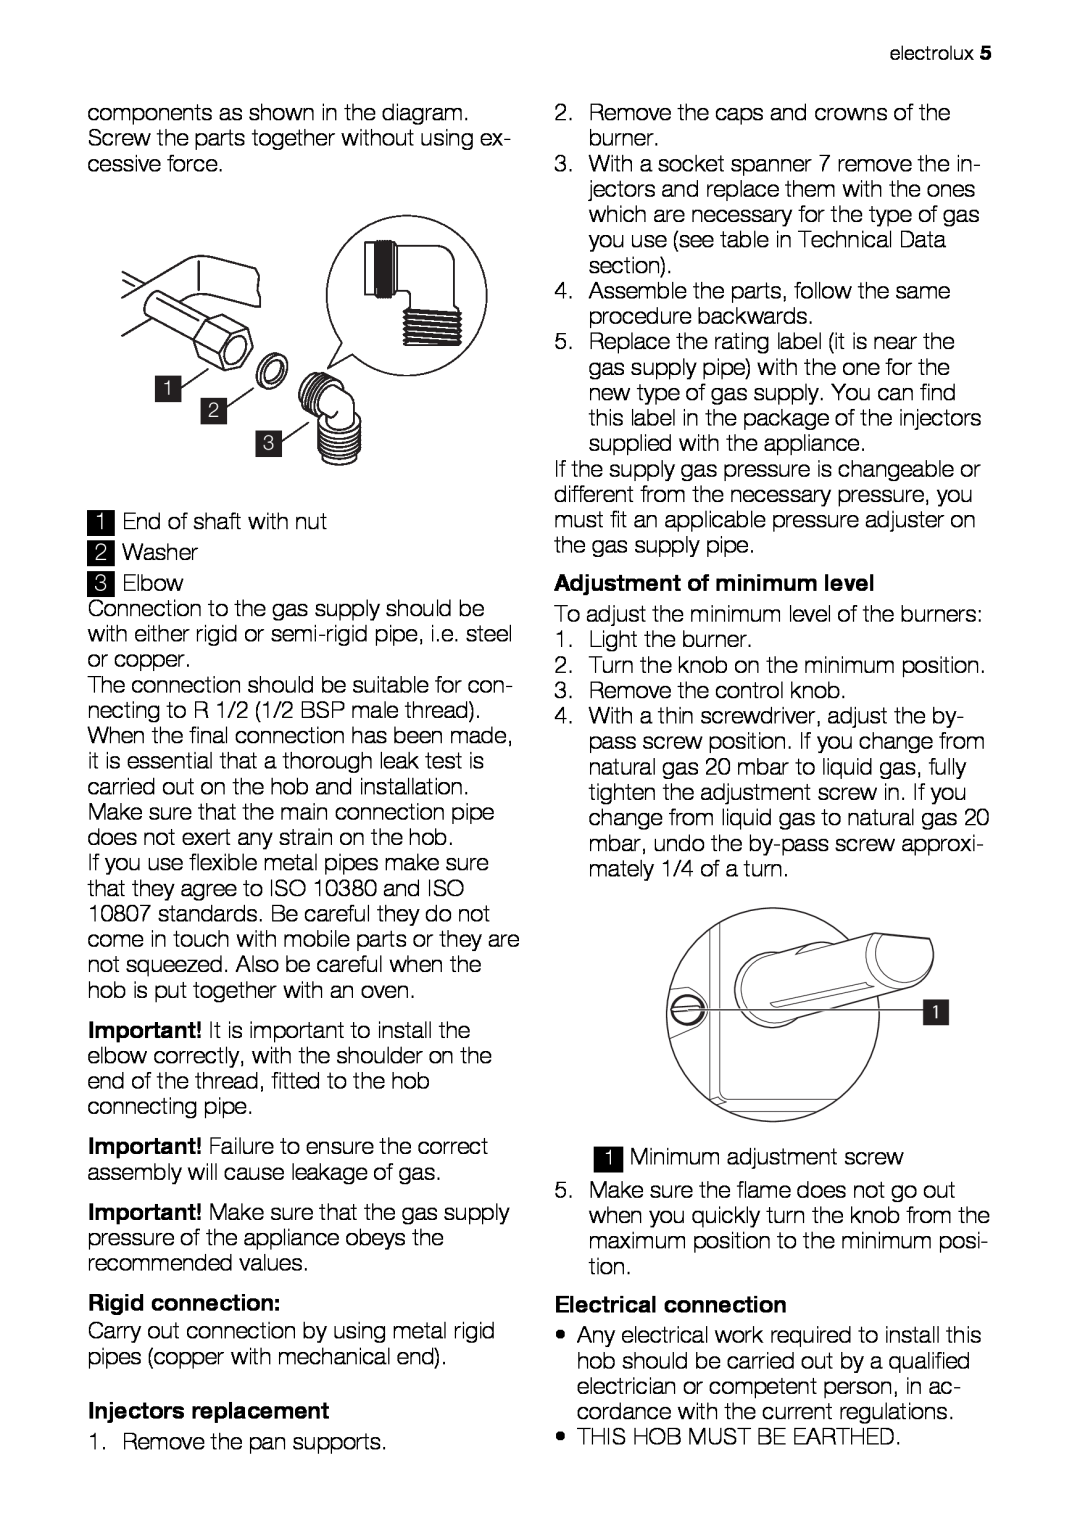 Electrolux EHG60412 user manual Rigid connection, Injectors replacement, Adjustment of minimum level, Electrical connection 